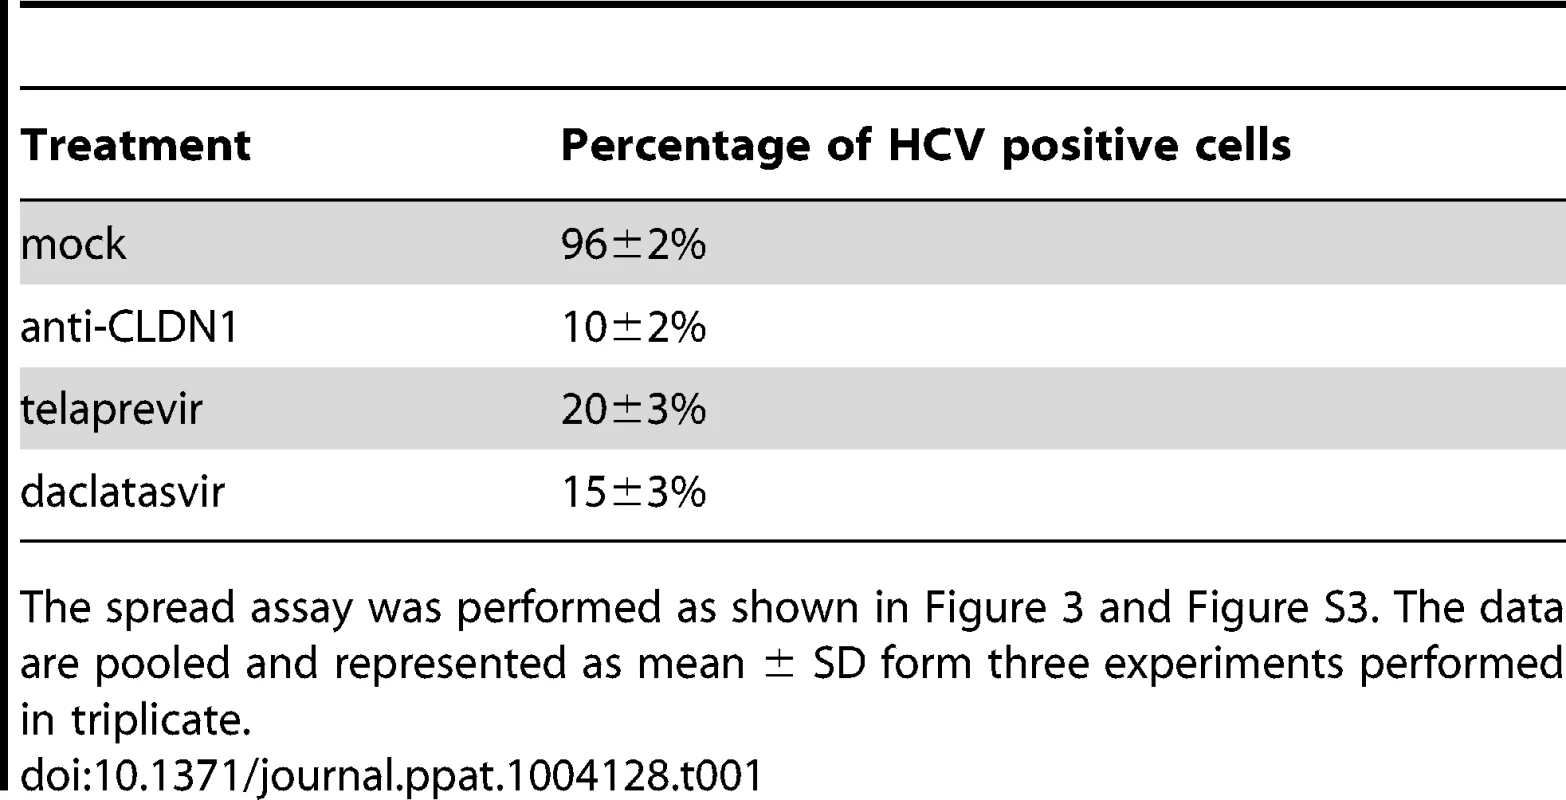 The CLDN1-specific antibody is efficient in inhibiting HCV spread.